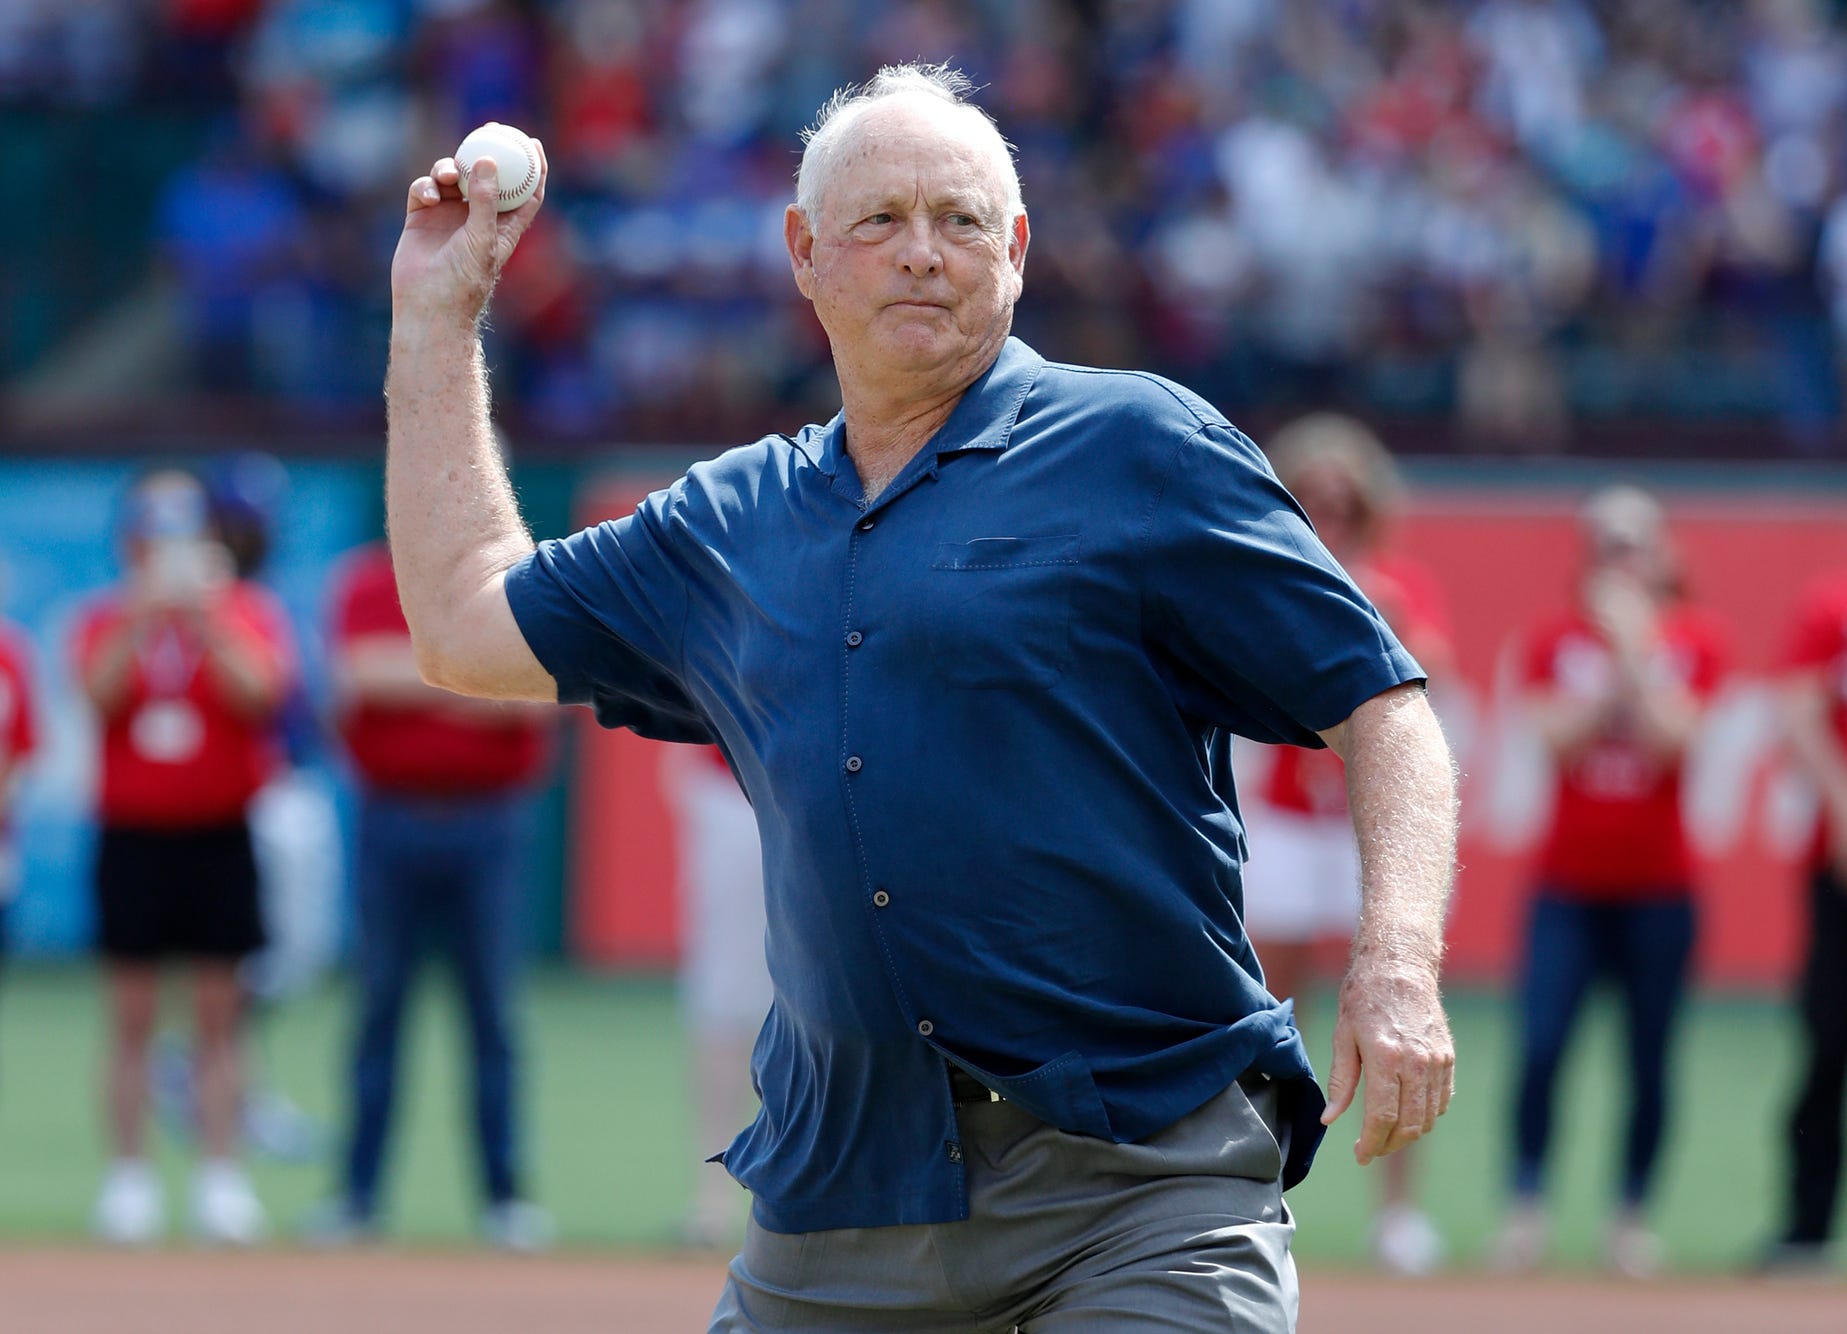 Nolan Ryan, 75, would still like a chance to help guide an MLB